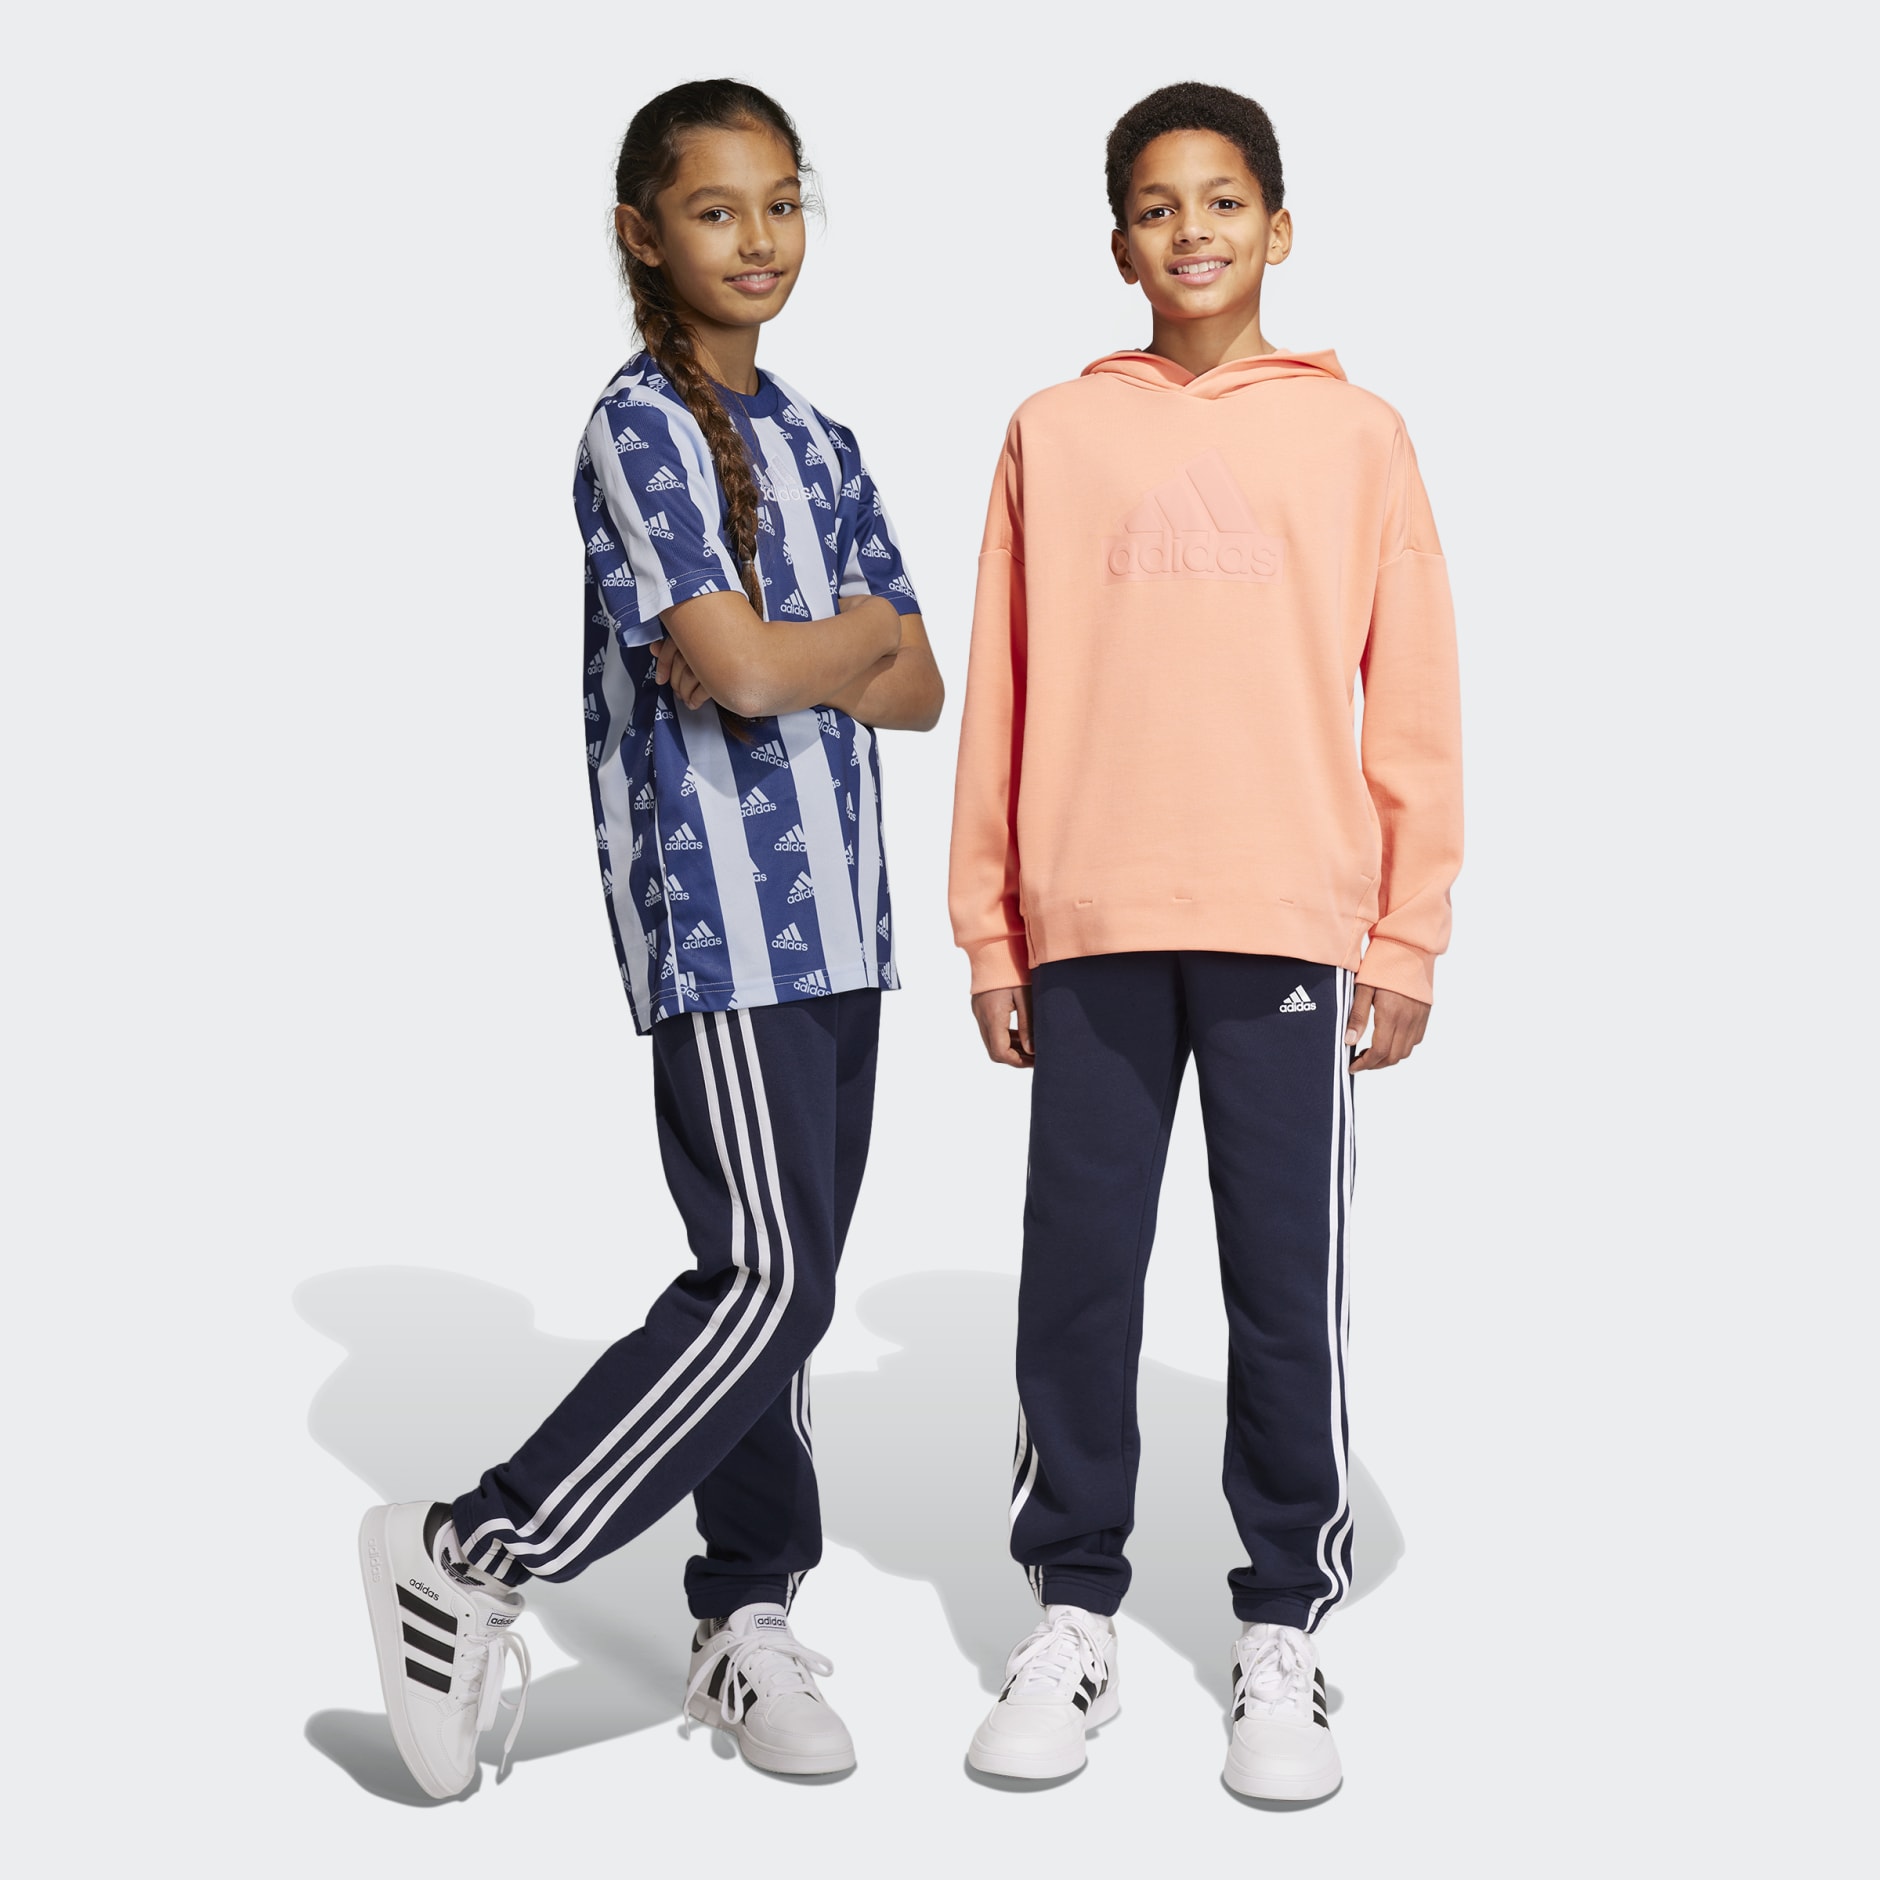 Adidas Outfits  Trendy outfits, Teenager outfits, Fashion outfits